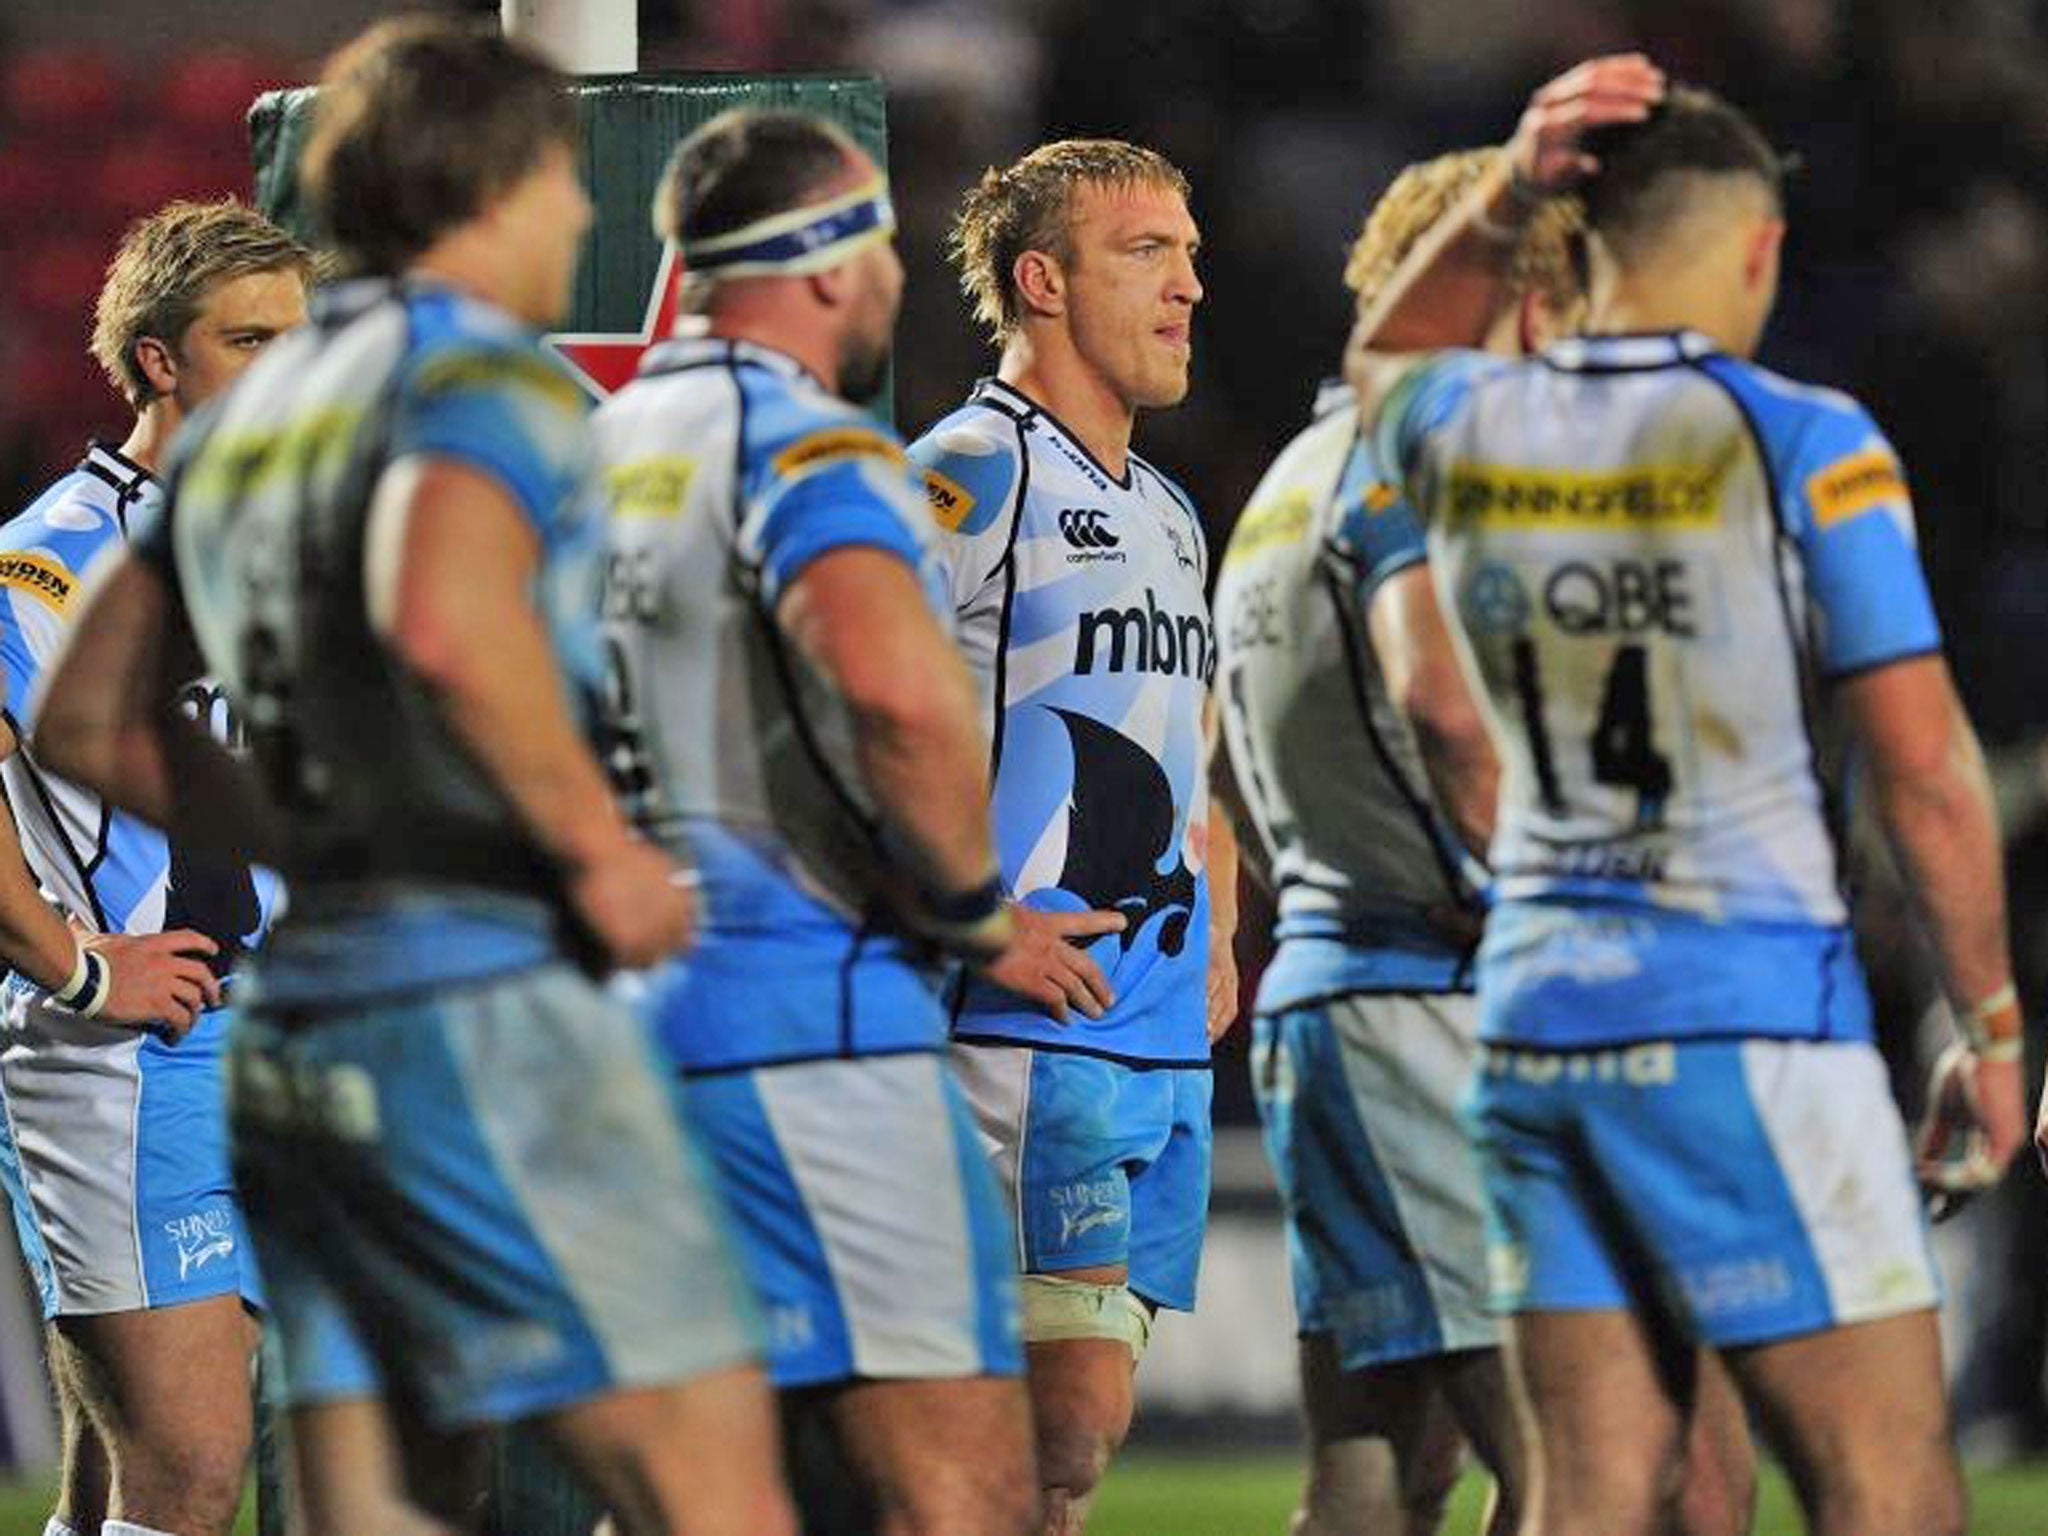 Dejected Sale Sharks players facing defeat against Toulon on
Saturday